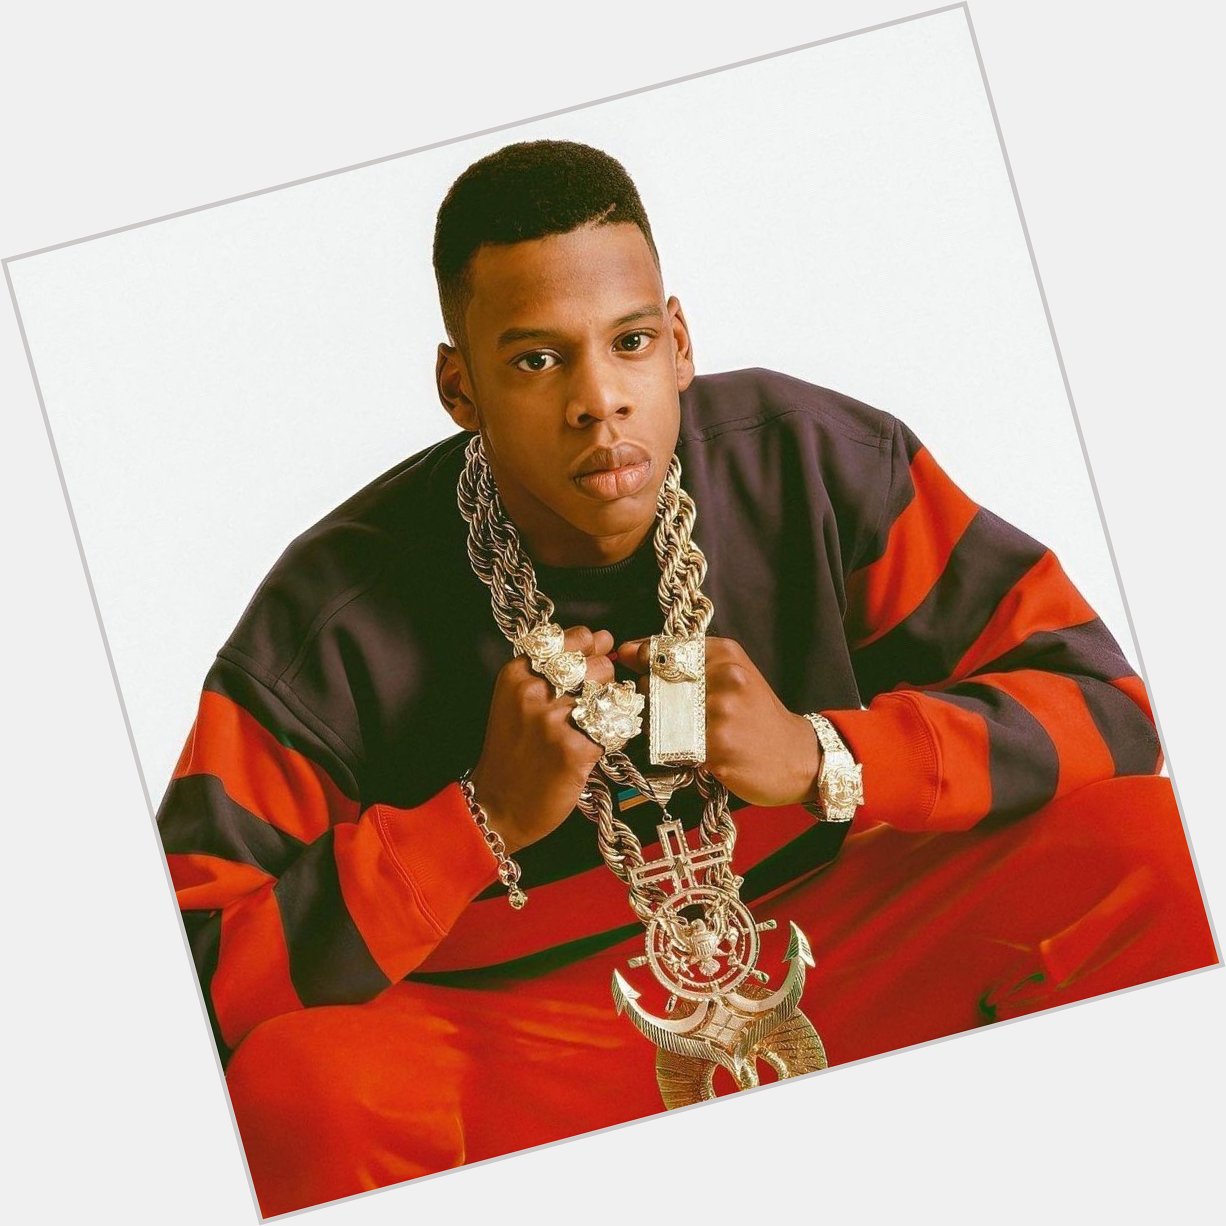 Happy 53rd birthday, Jay Z

Drop your favorite Jay tracks or lyrics in the replies 